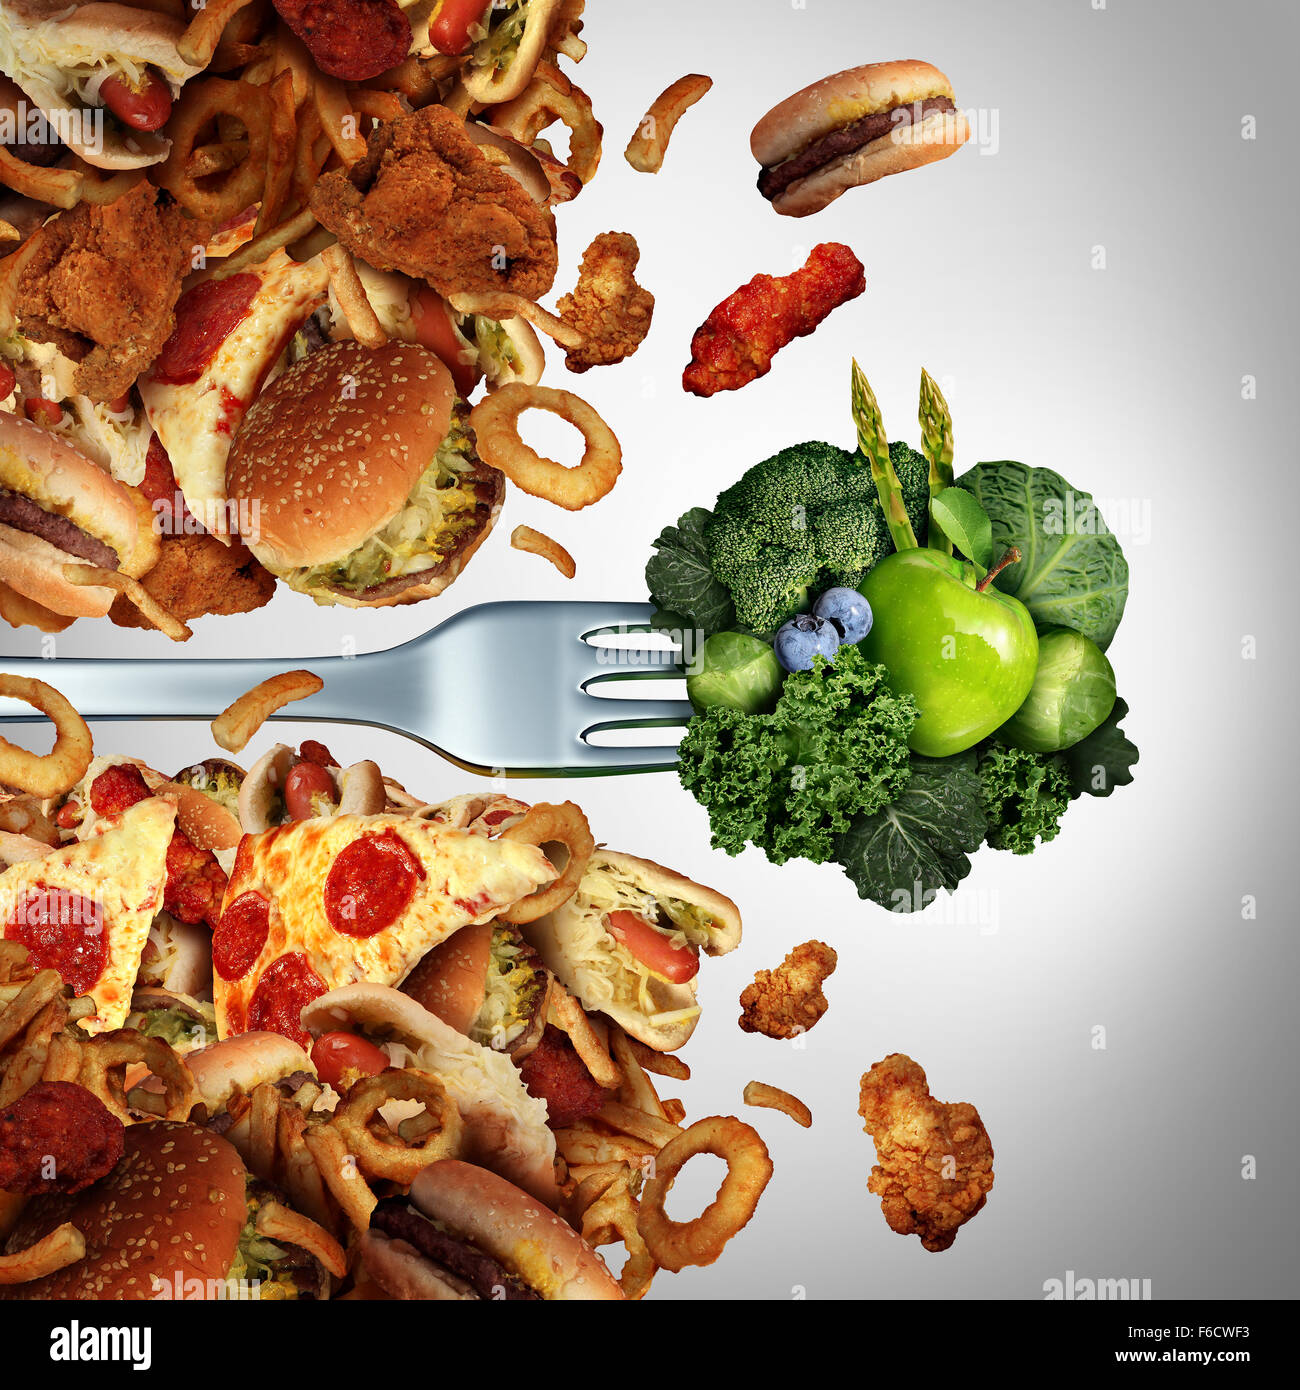 Health diet breakthrough nutrition concept as a fork with green healthy fruits and vegetables breaking through a wall of greasy Stock Photo